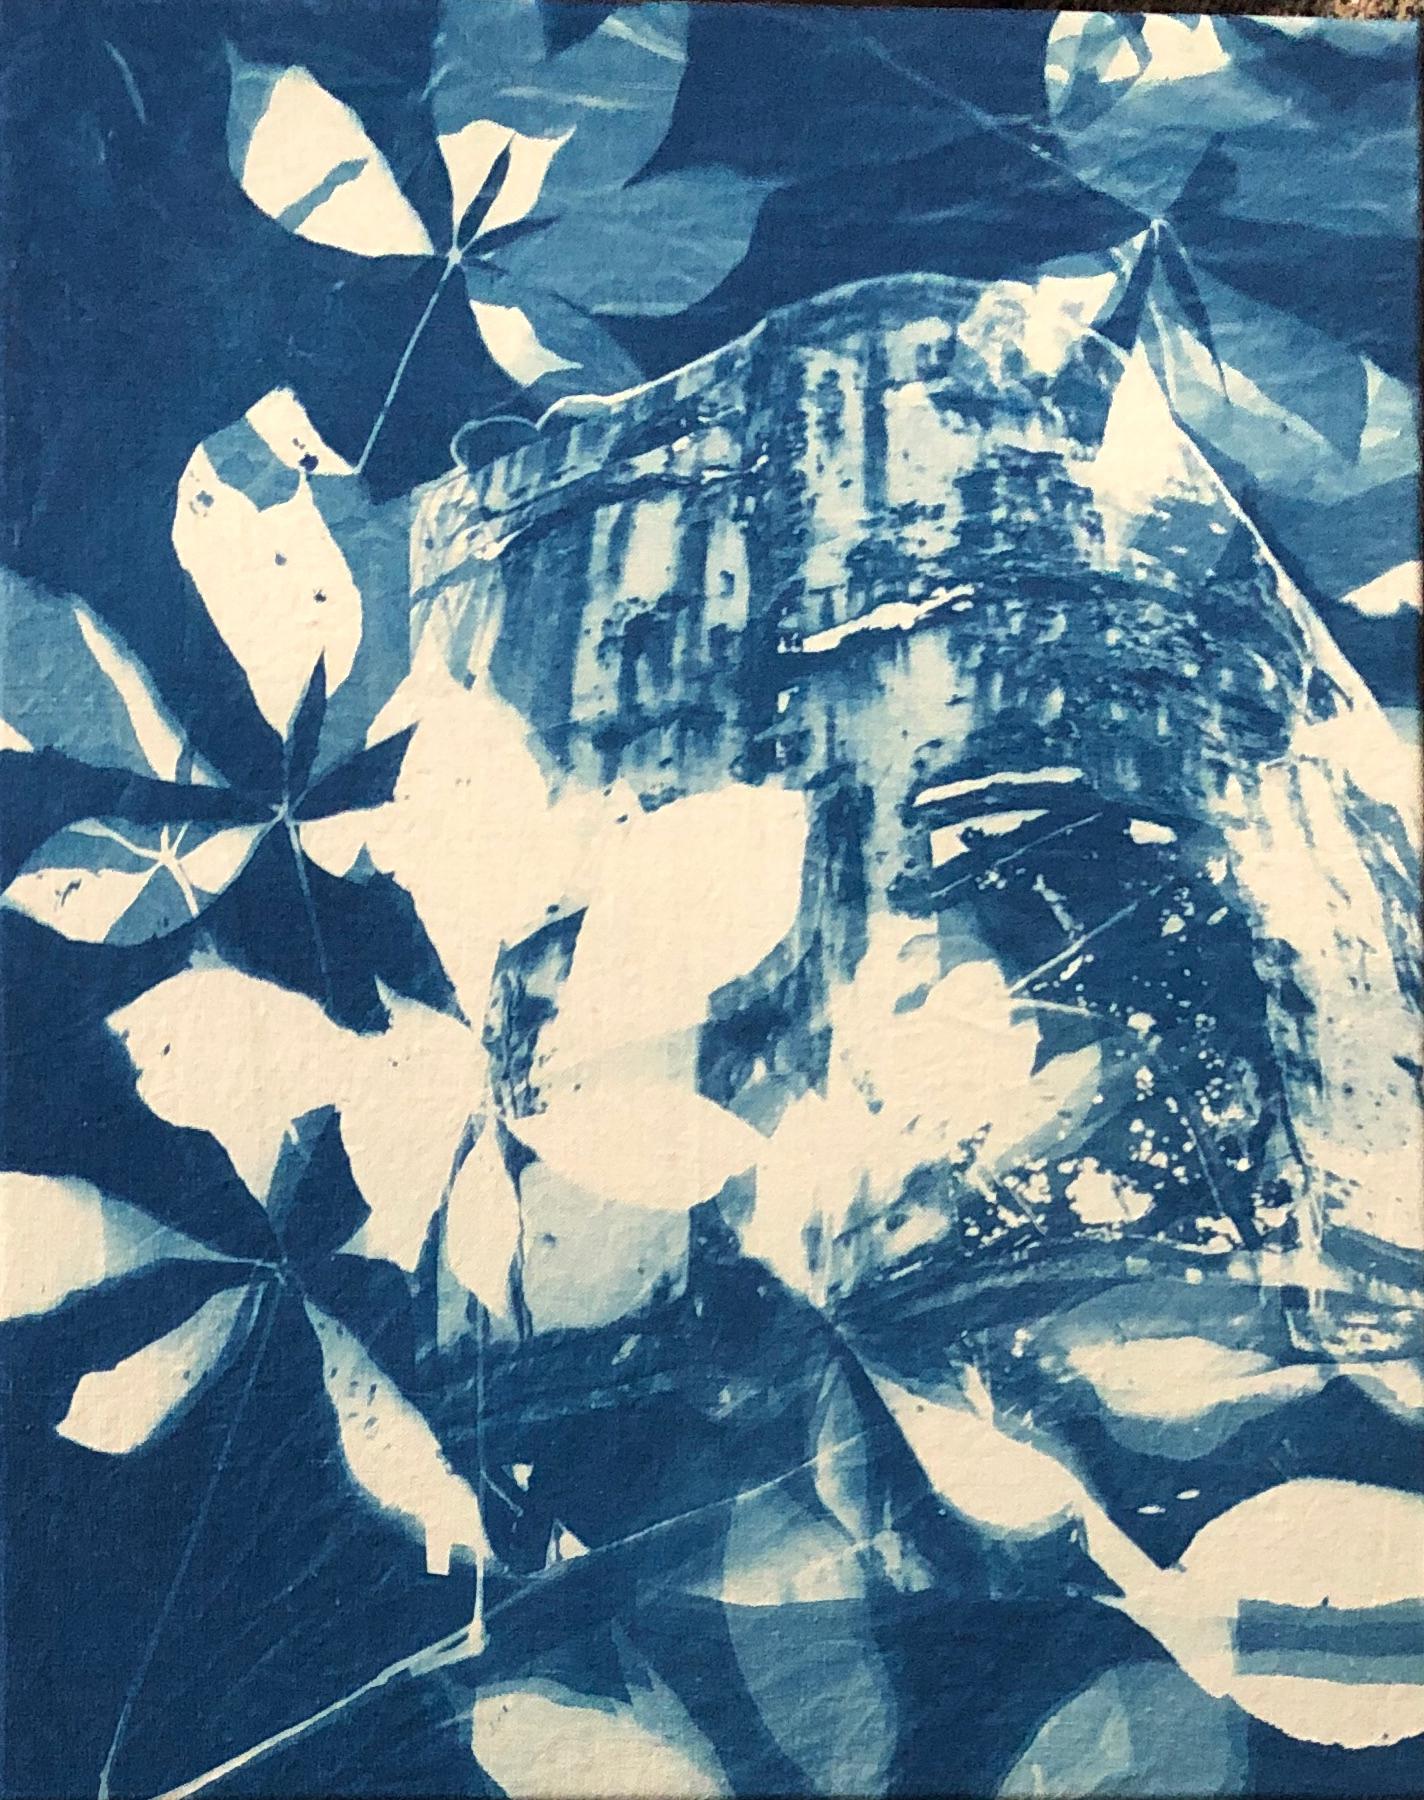 Marie Craig Abstract Photograph - "Crane 5", contemporary, industrial, leaves, blue, cyanotype, photograph